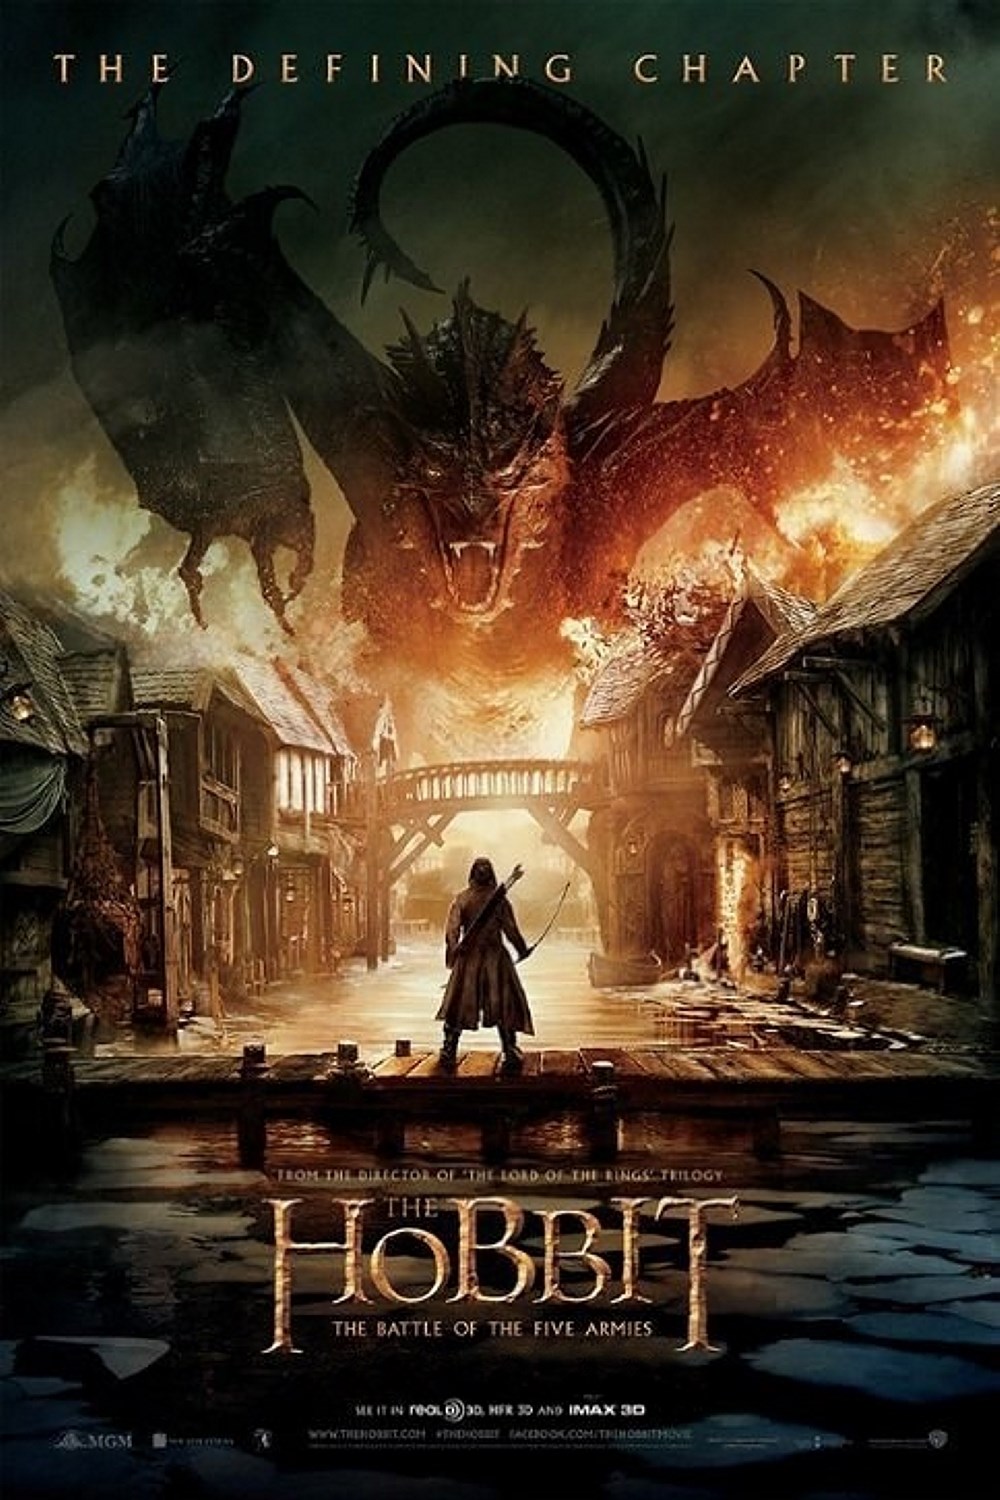 The Hobbit: the battle of the five armies - 2014